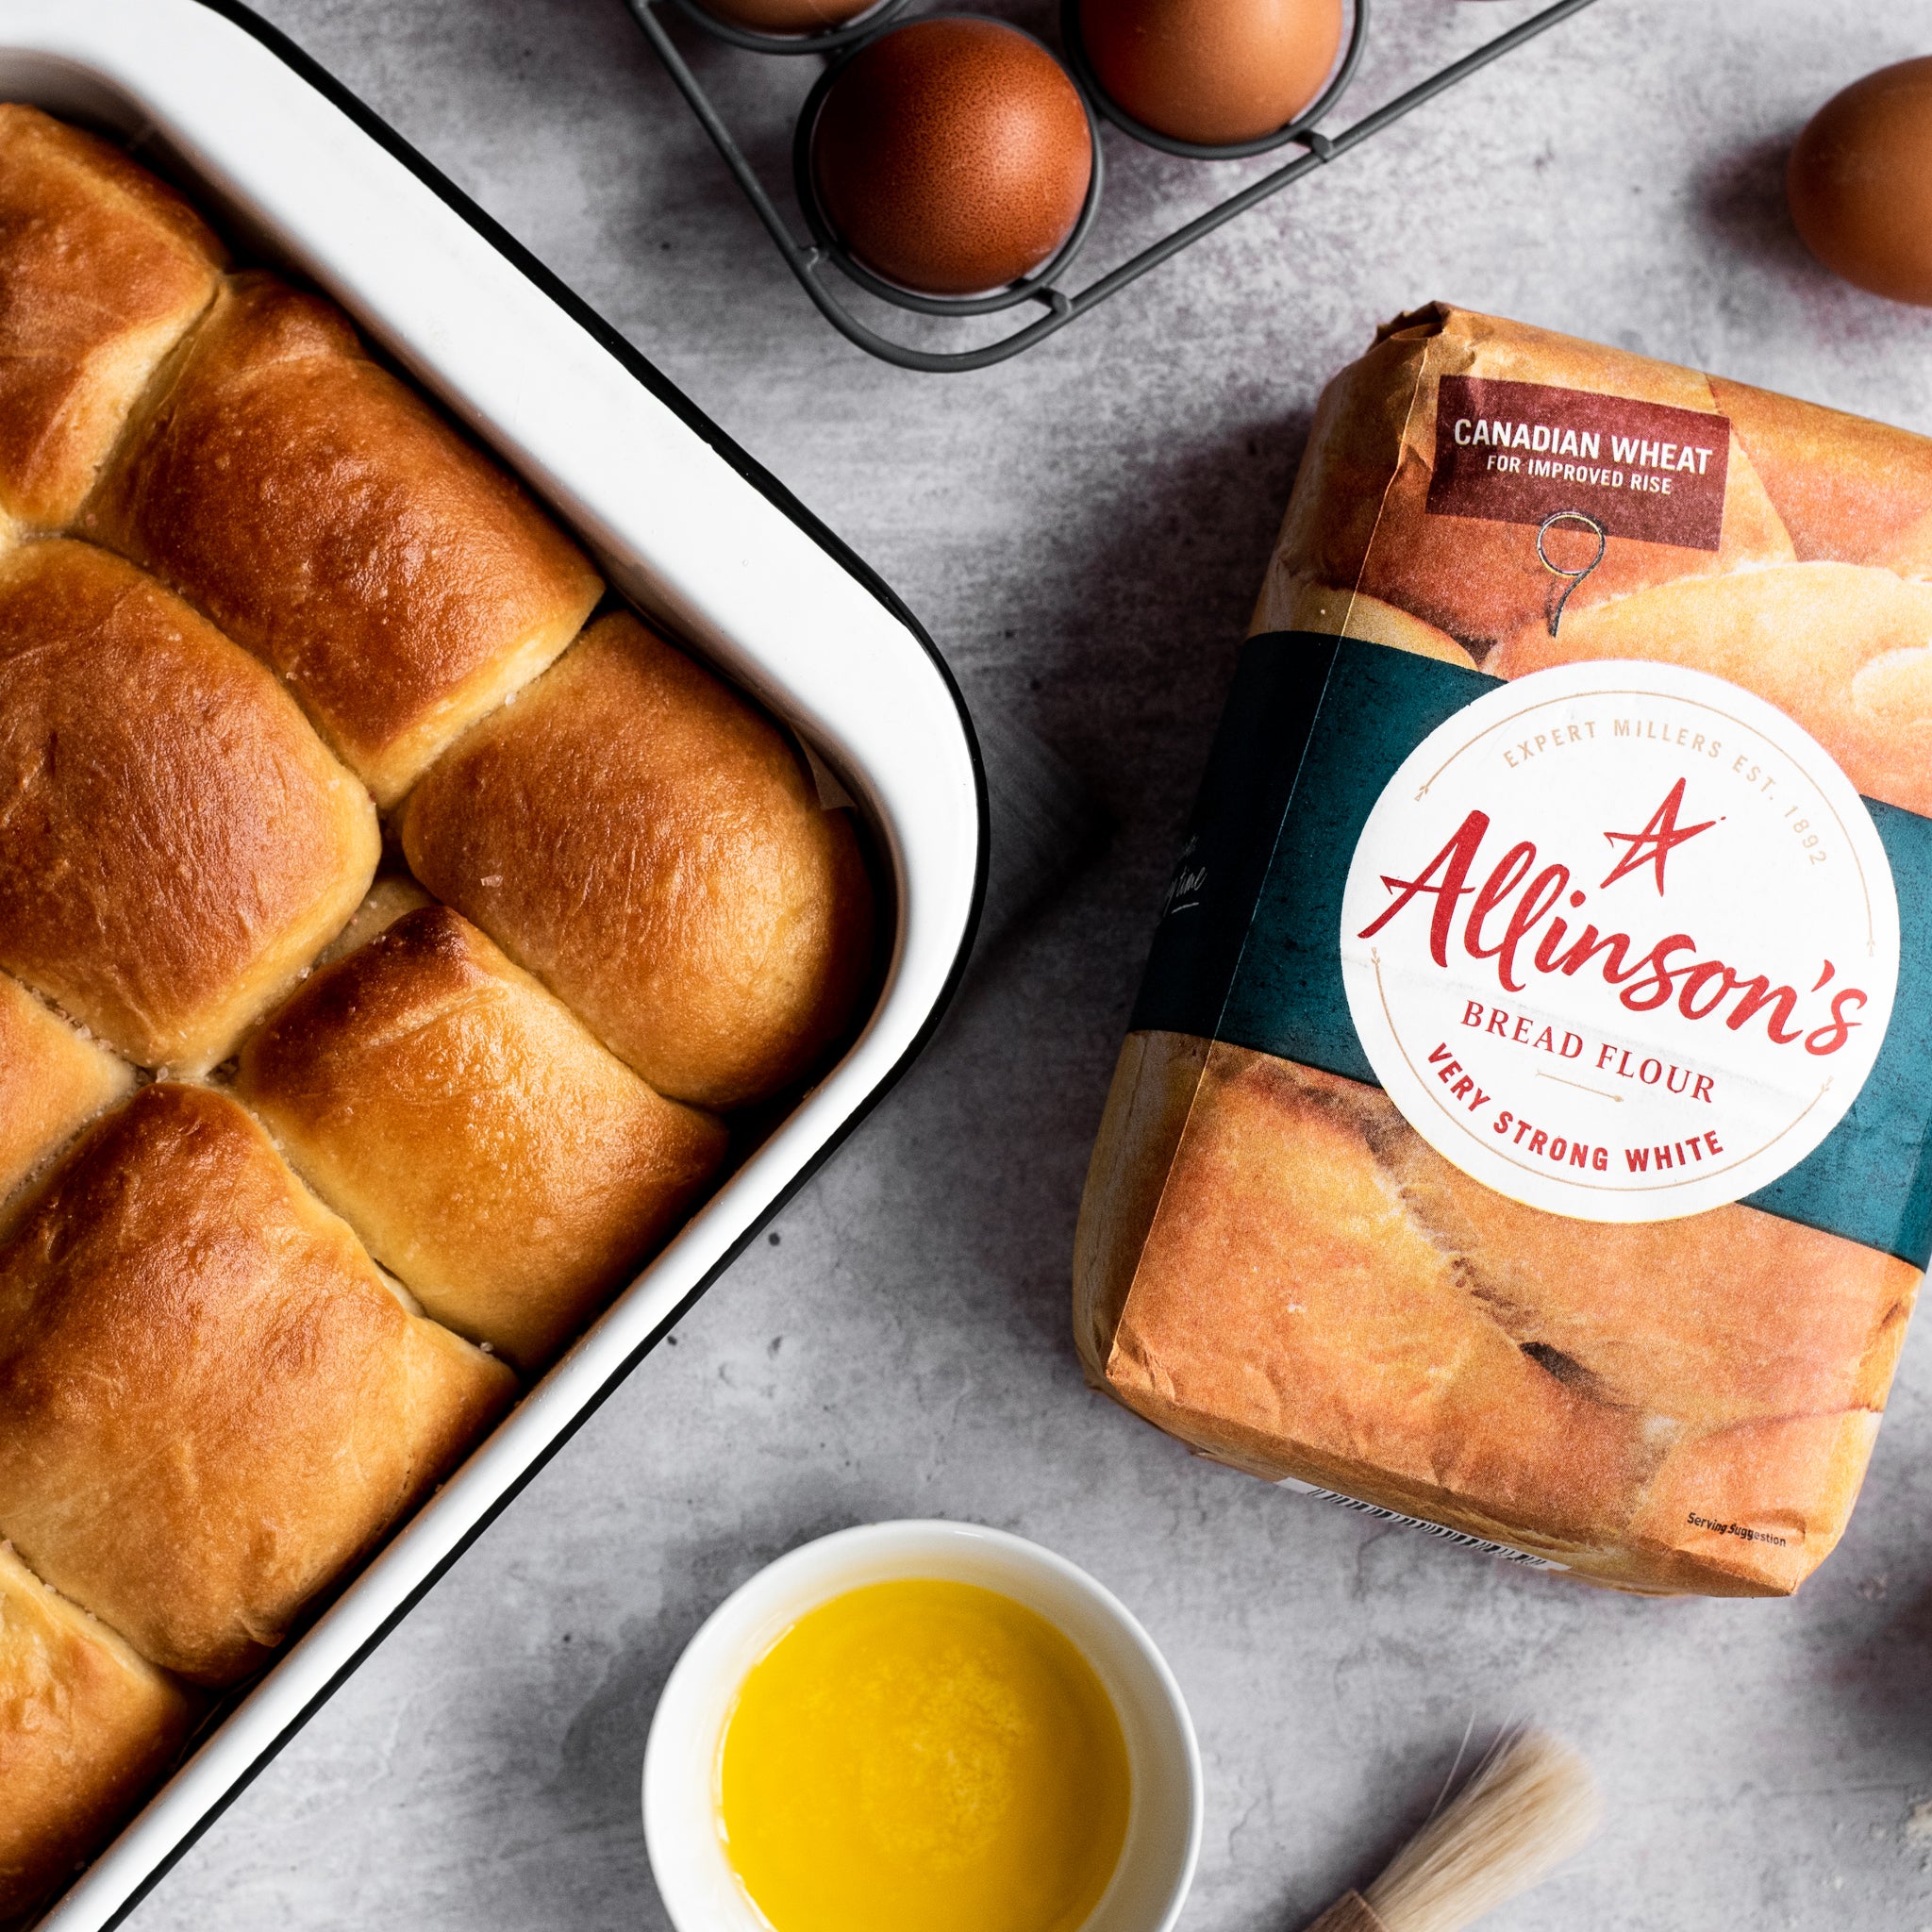 bread rolls in a tin with a side of melted butter and Allinson's bread flour